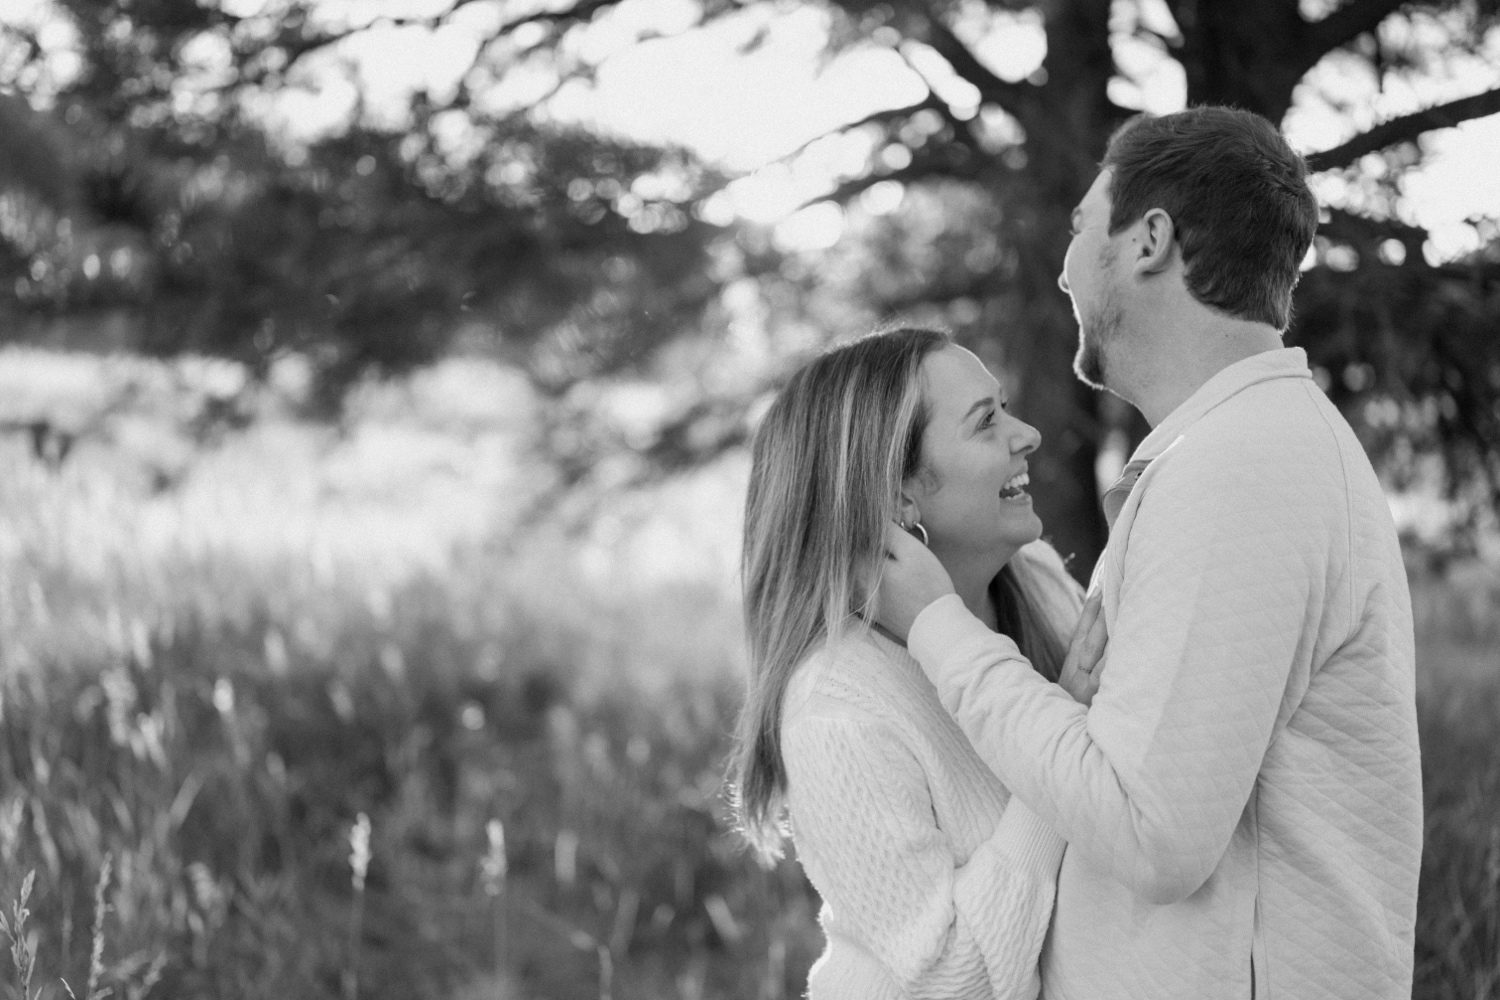 A black and white photos of an engaged couple embracing each other in Elk Meadow Park in Evergreen, Colorado for their Colorado engagement photos, taken by Colorado wedding photographer Ashley Joyce Photography.